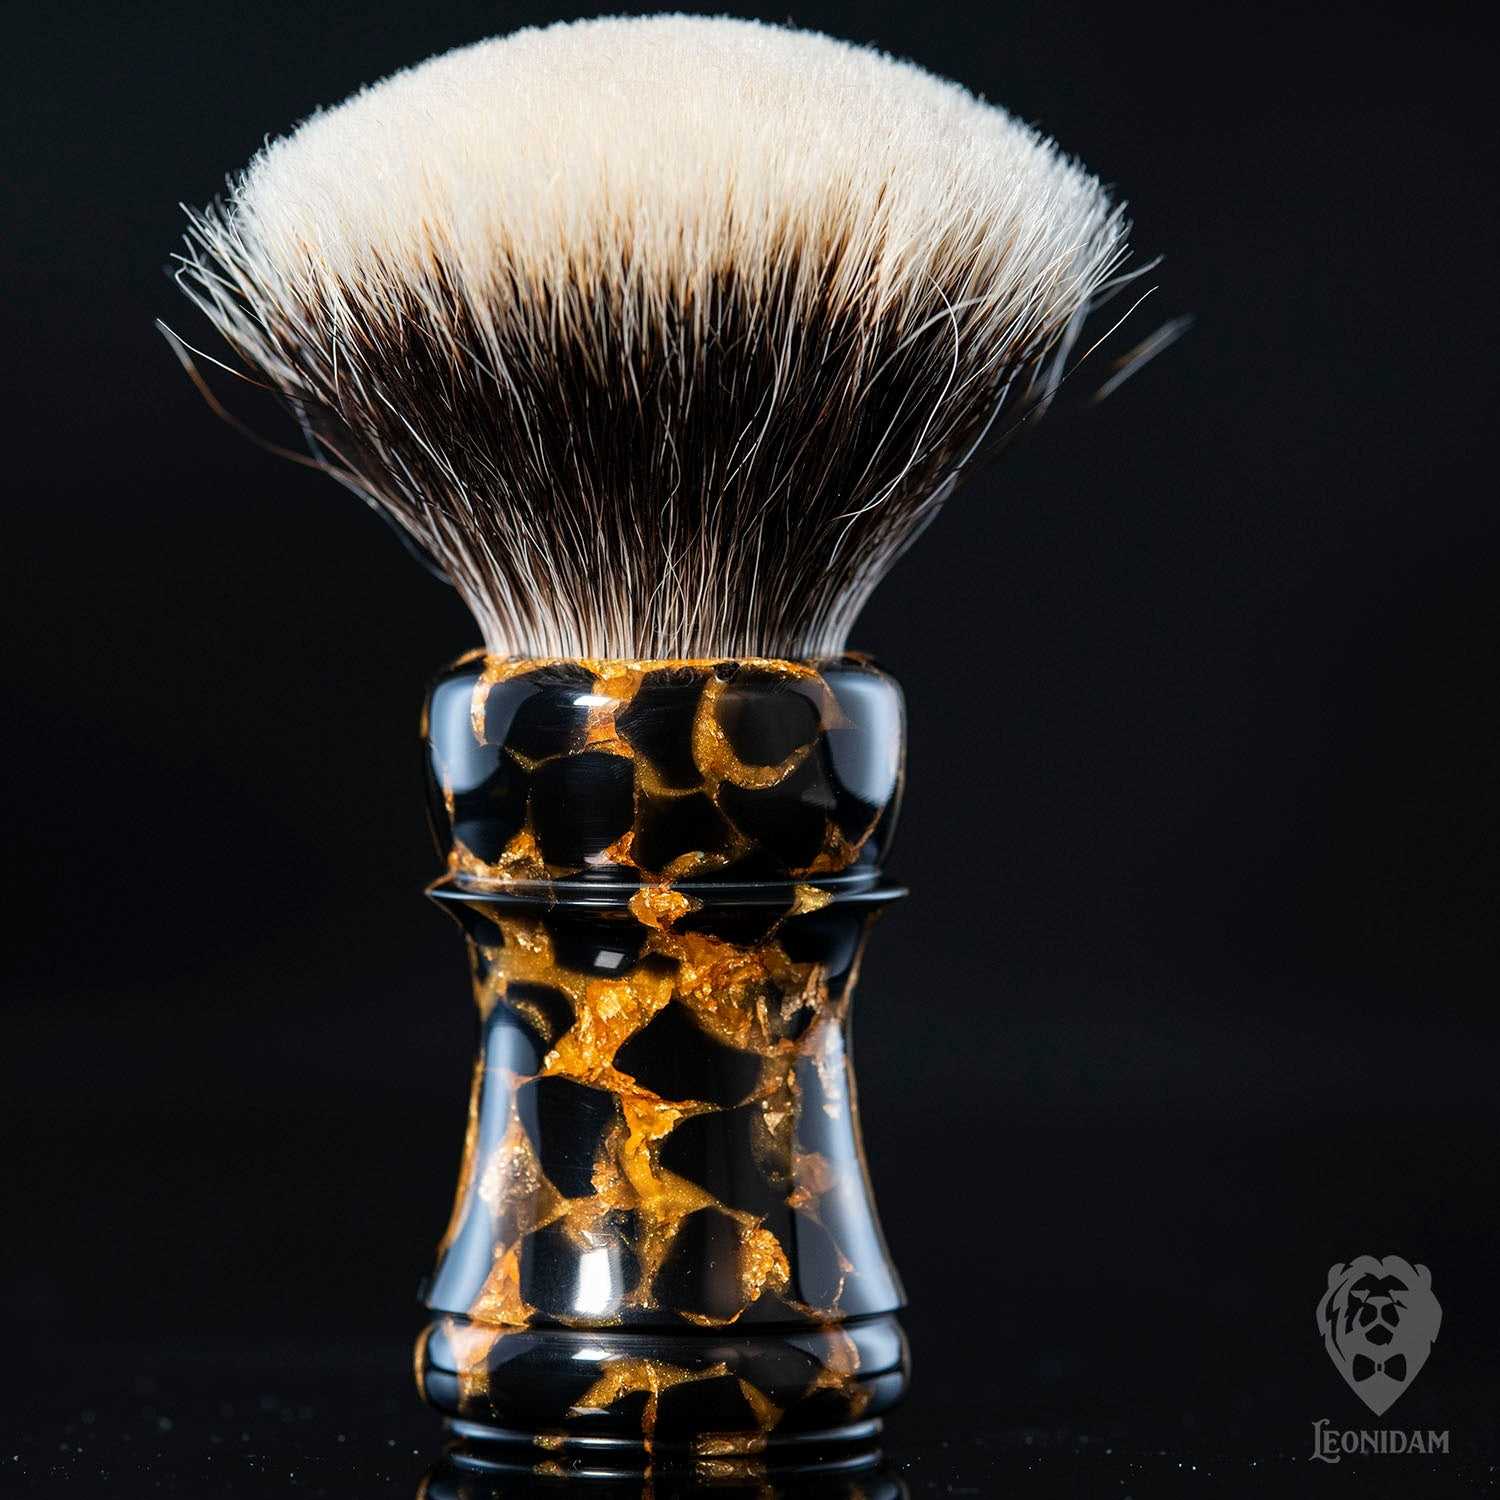 Handmade Shaving Brush "Anubis" in polished black and gold resin.